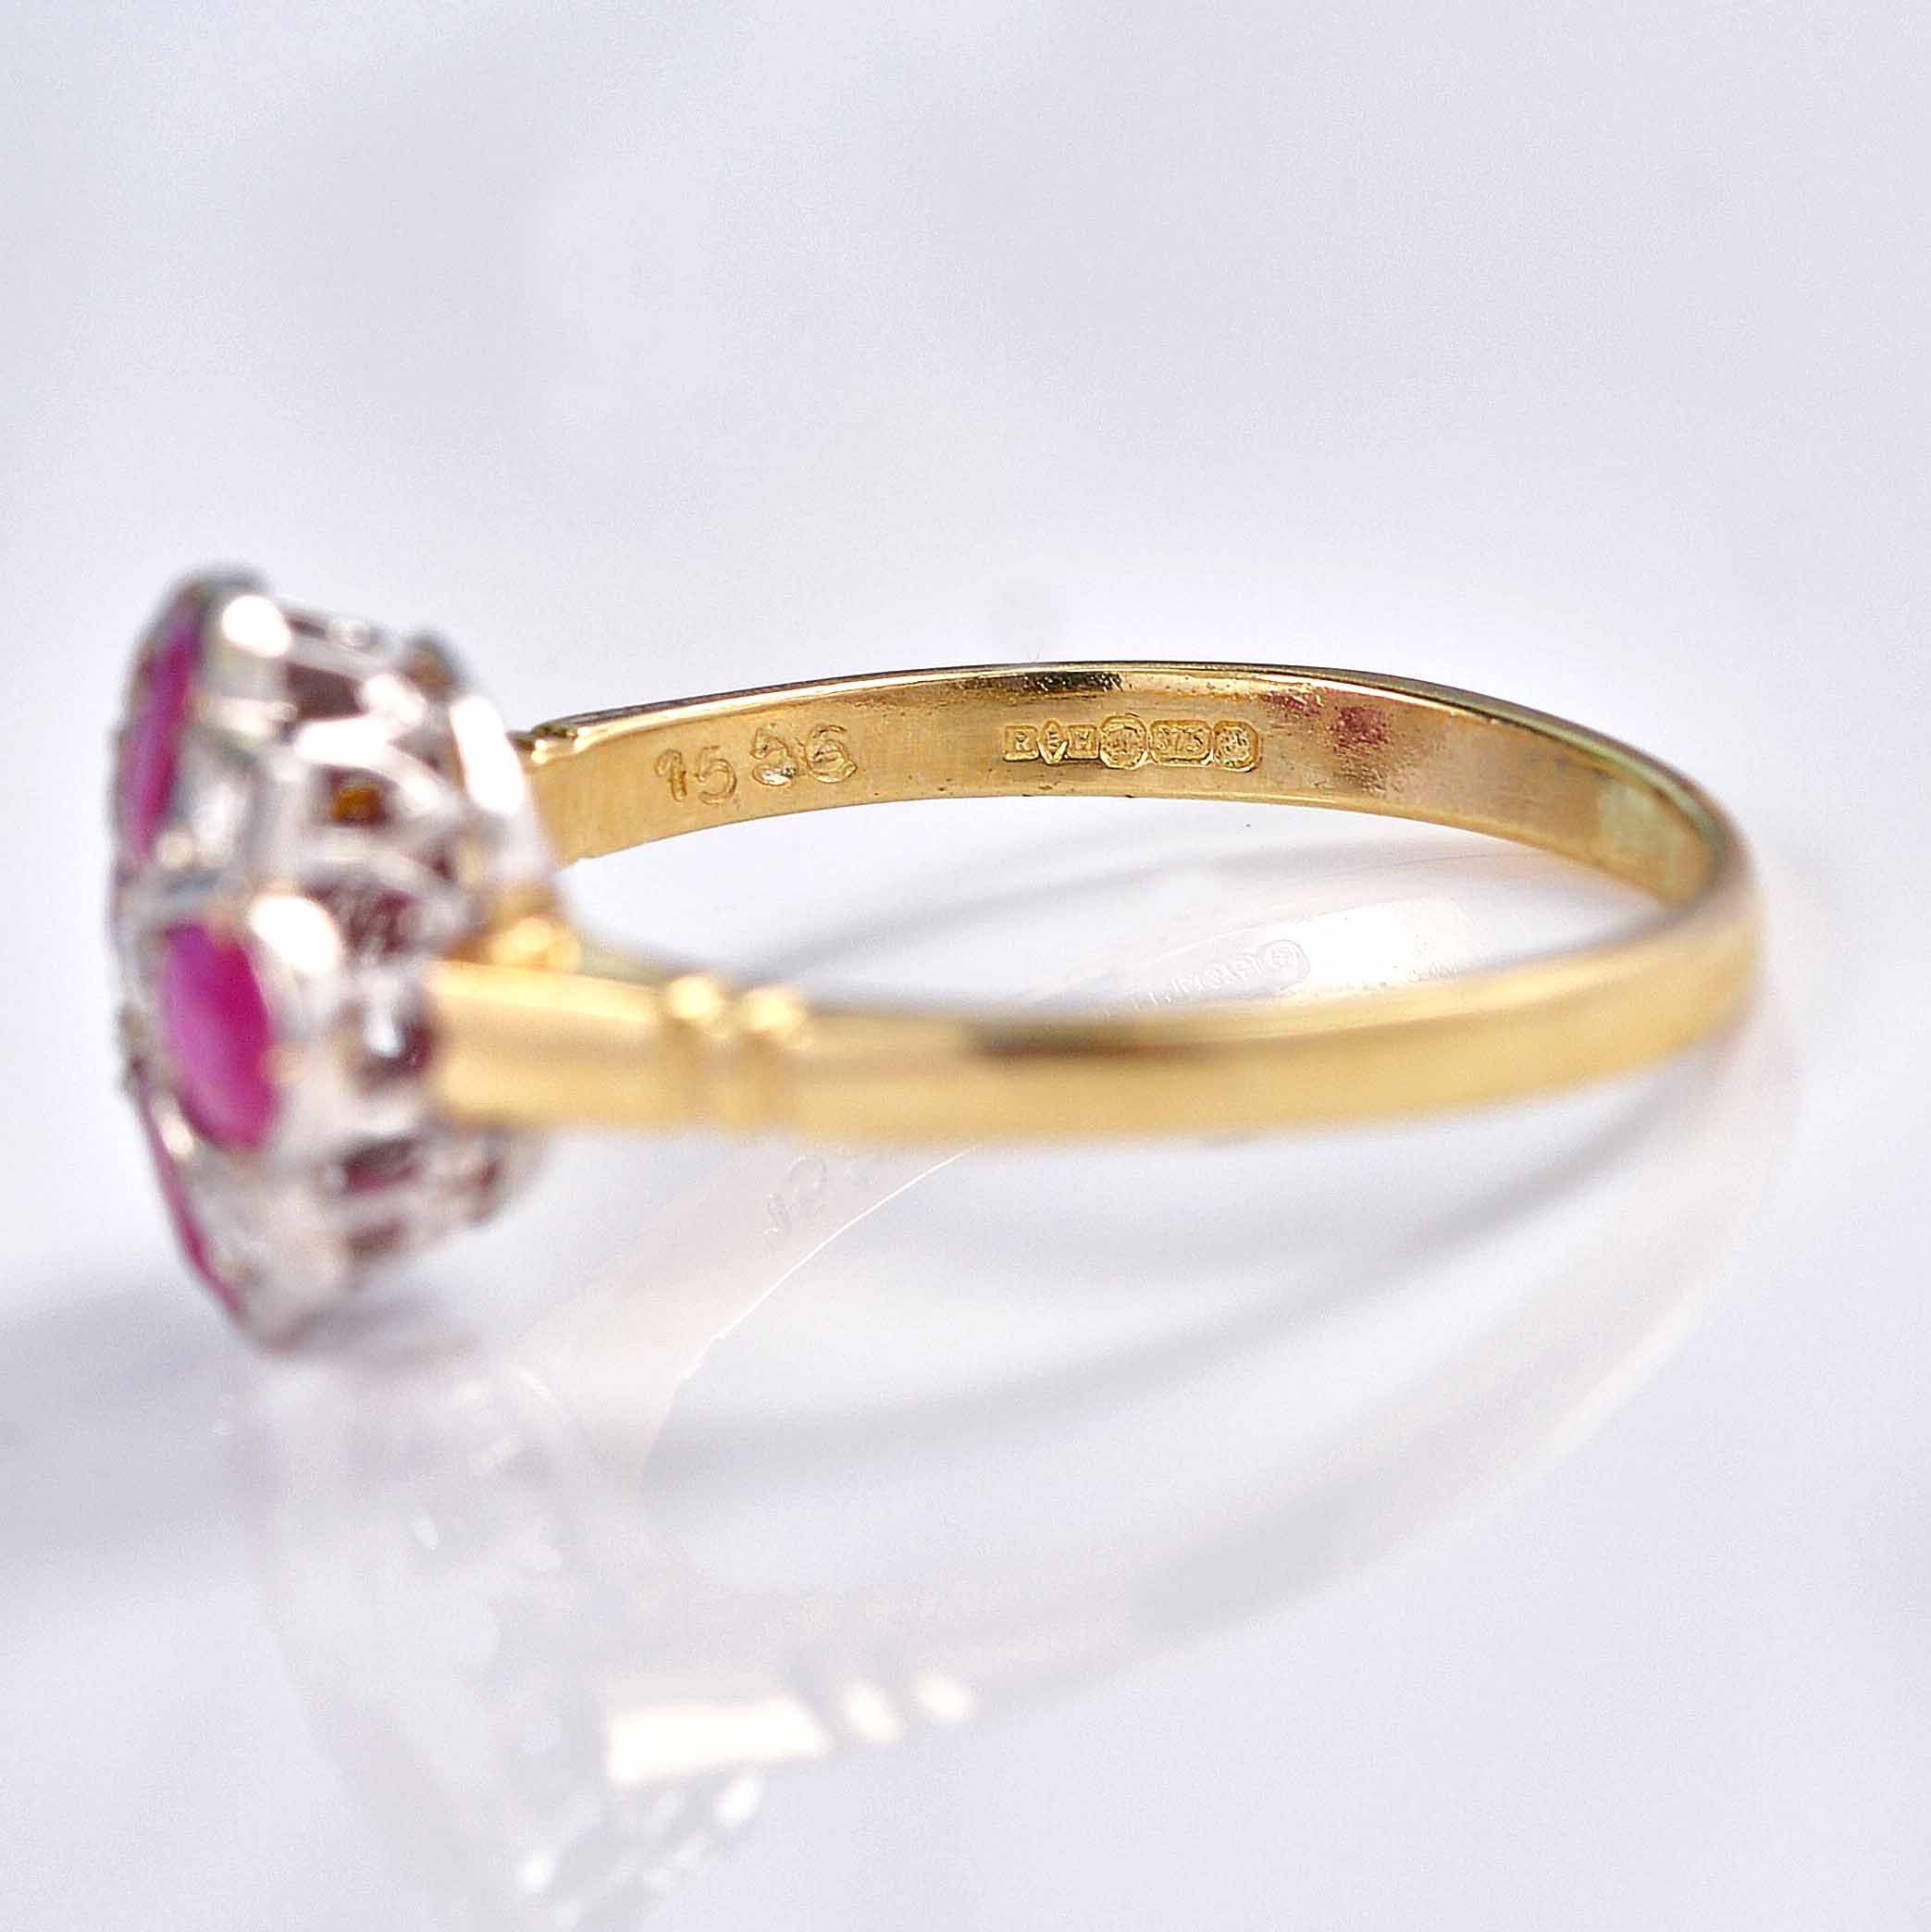 Ellibelle Jewellery Victorian Style Ruby & Diamond 9ct Gold Clover Ring